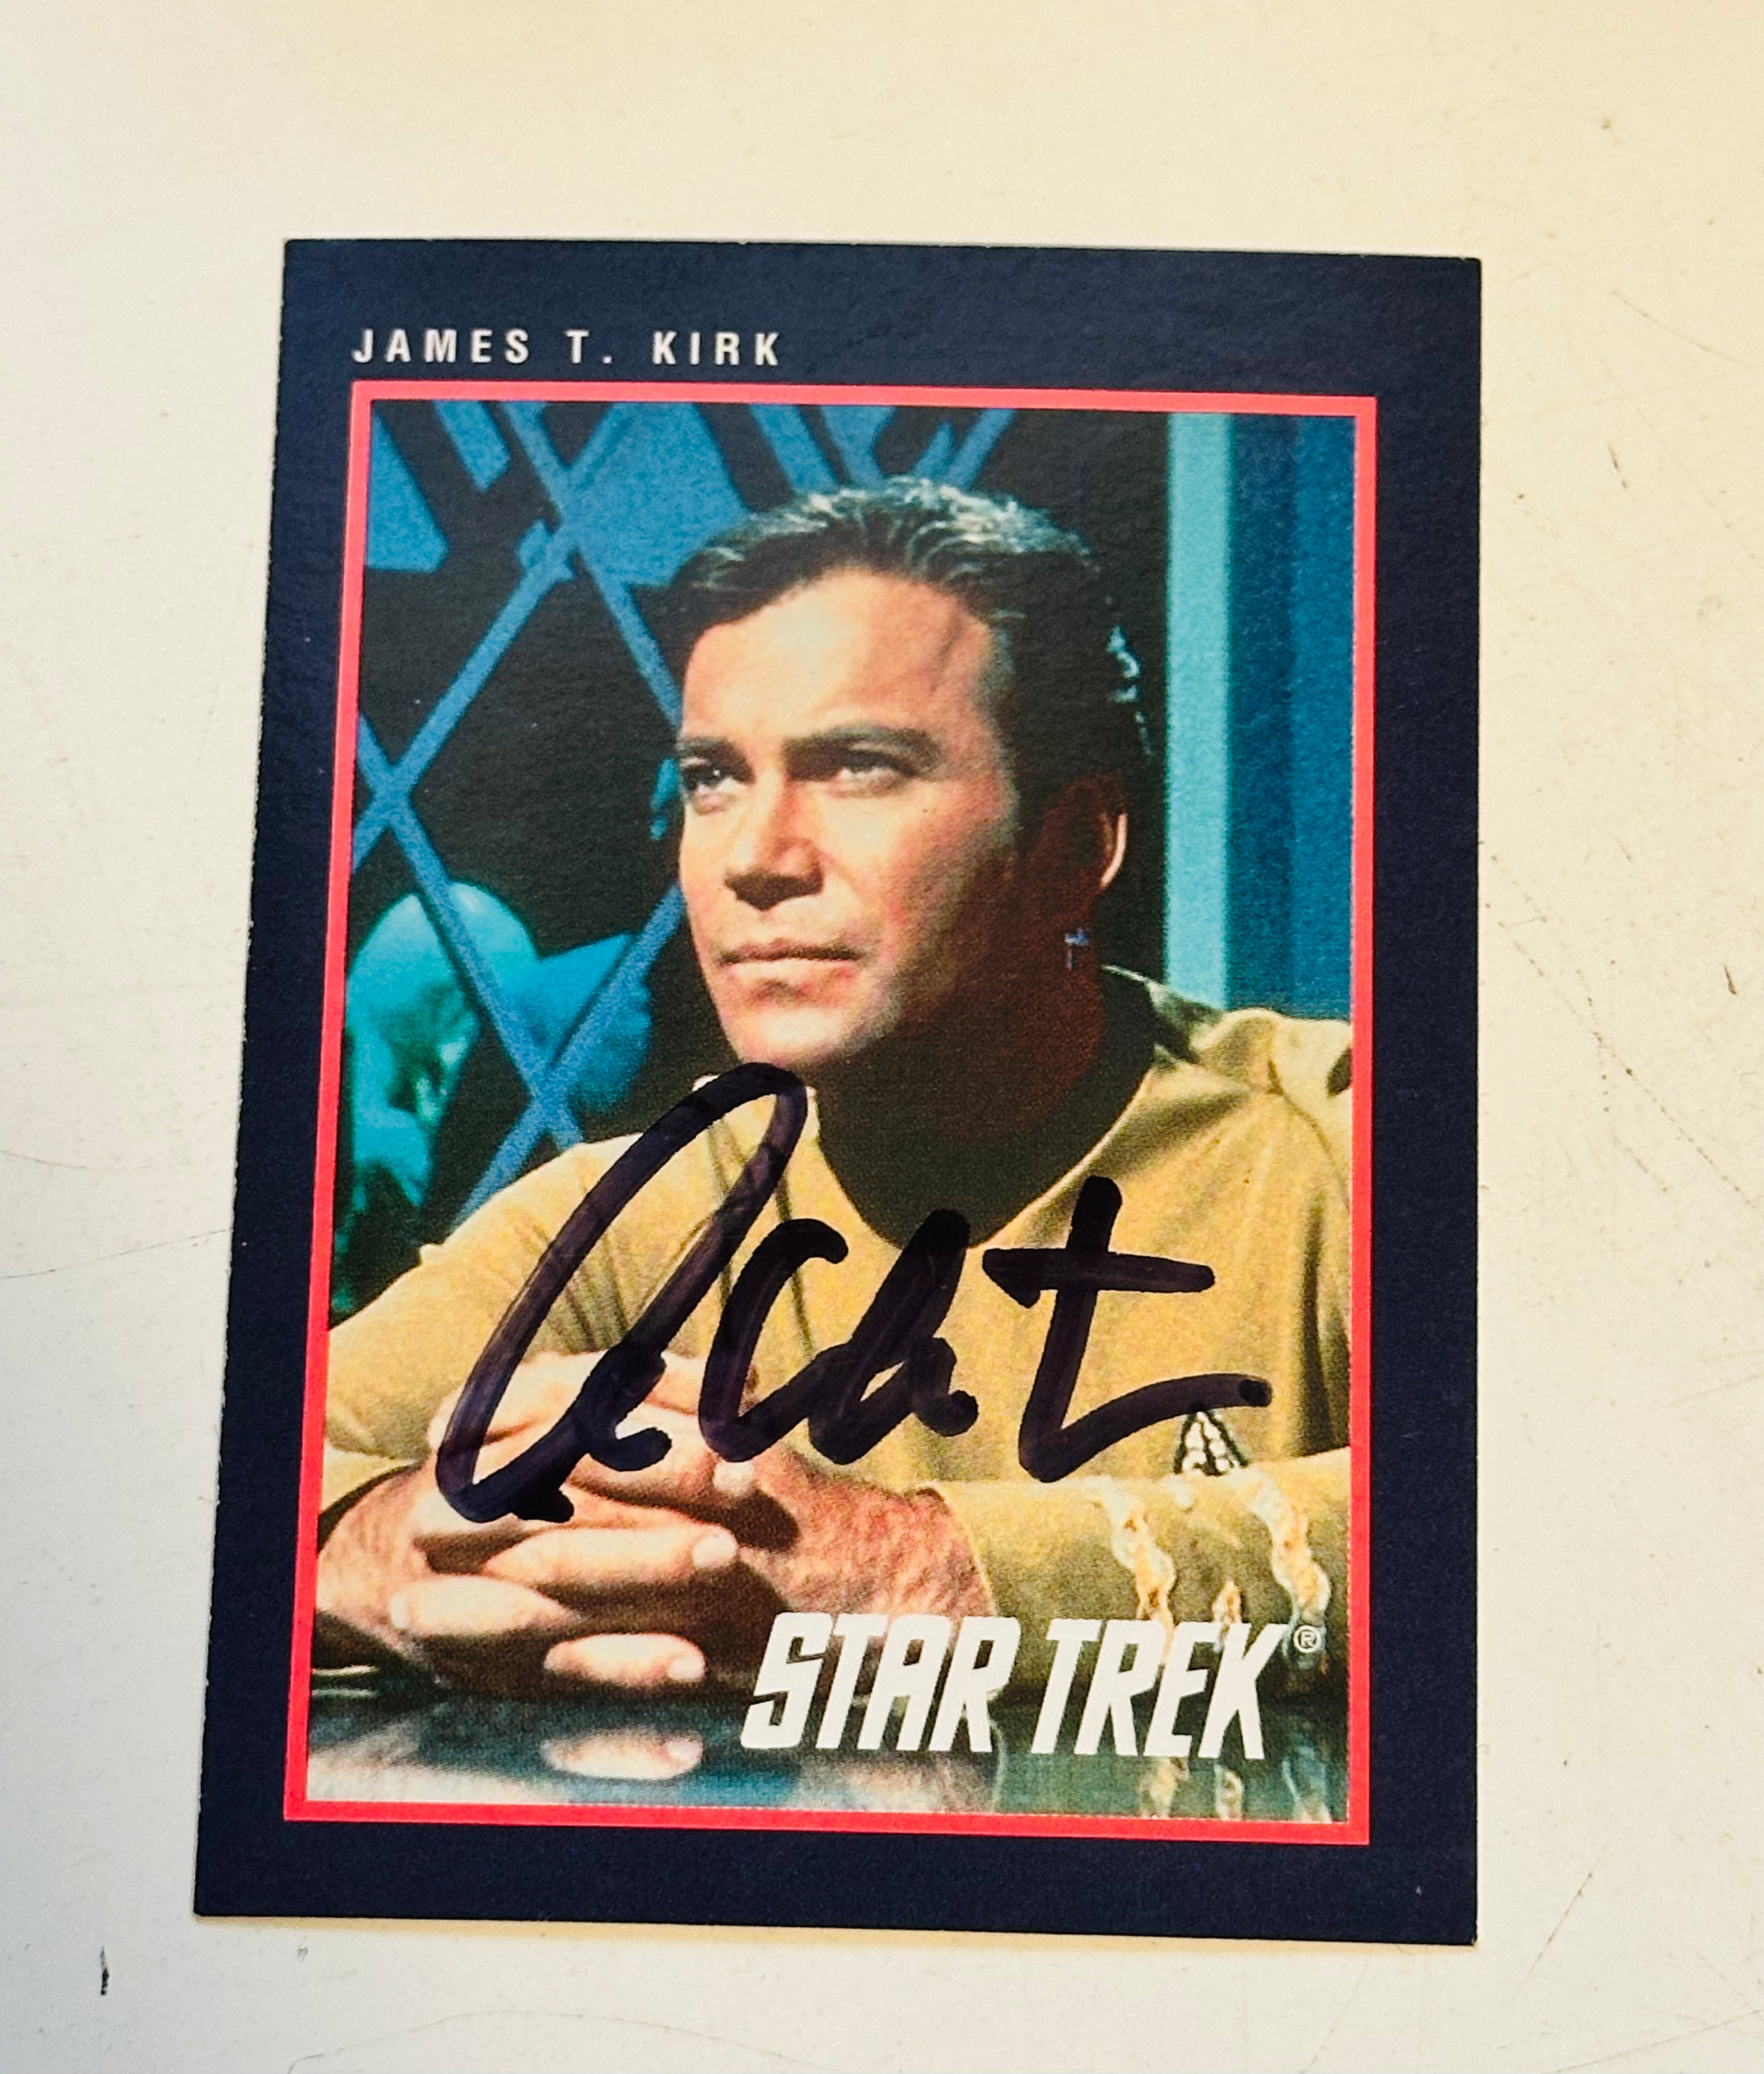 Star Trek William Shatner autographed card certified by Fanexpo COA